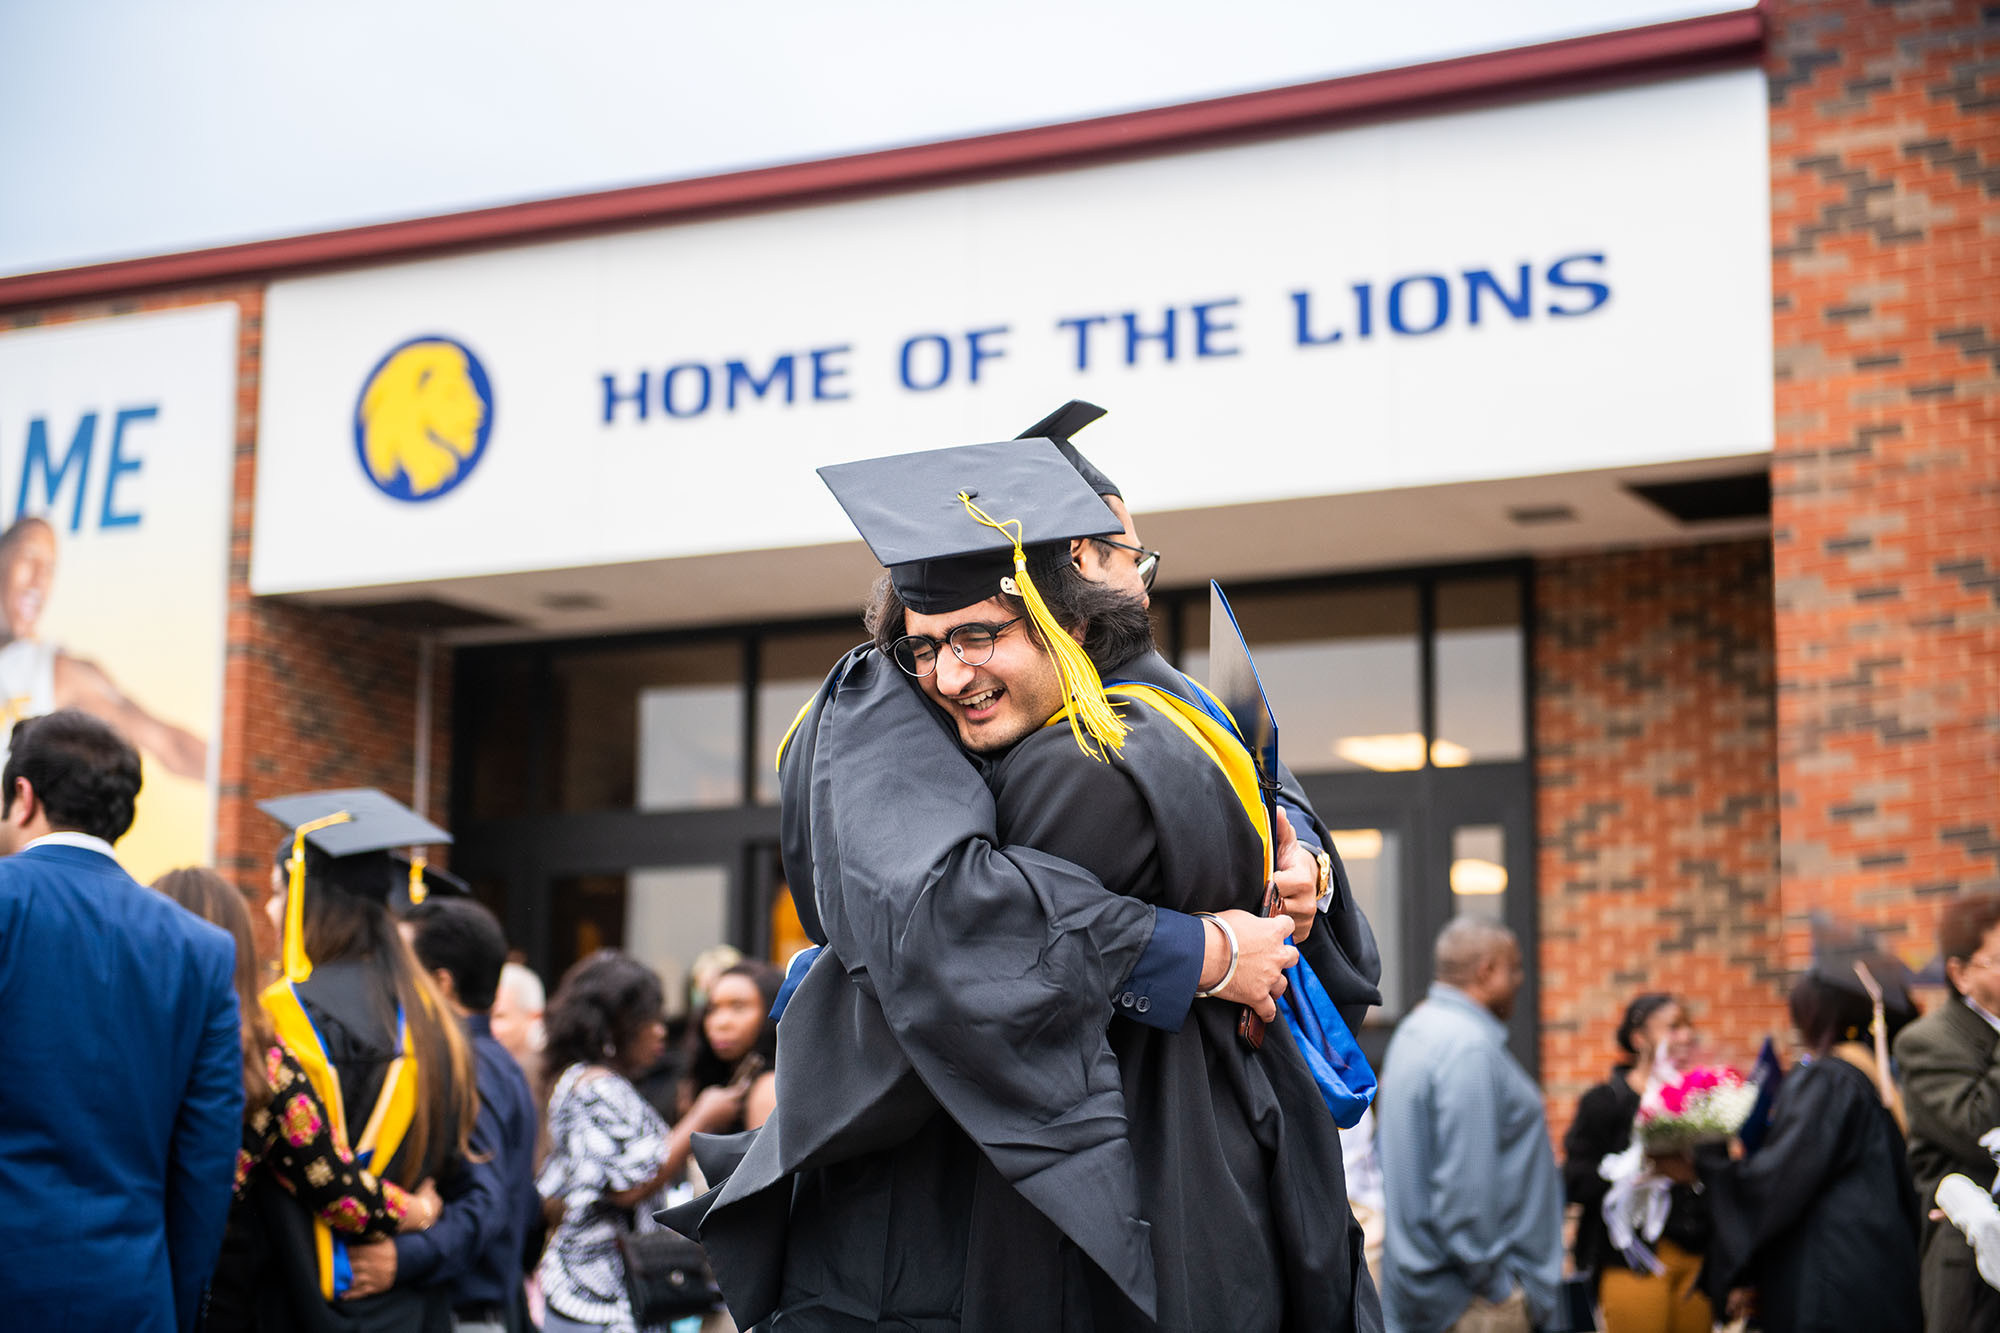 Two students hugging each other after graduation.